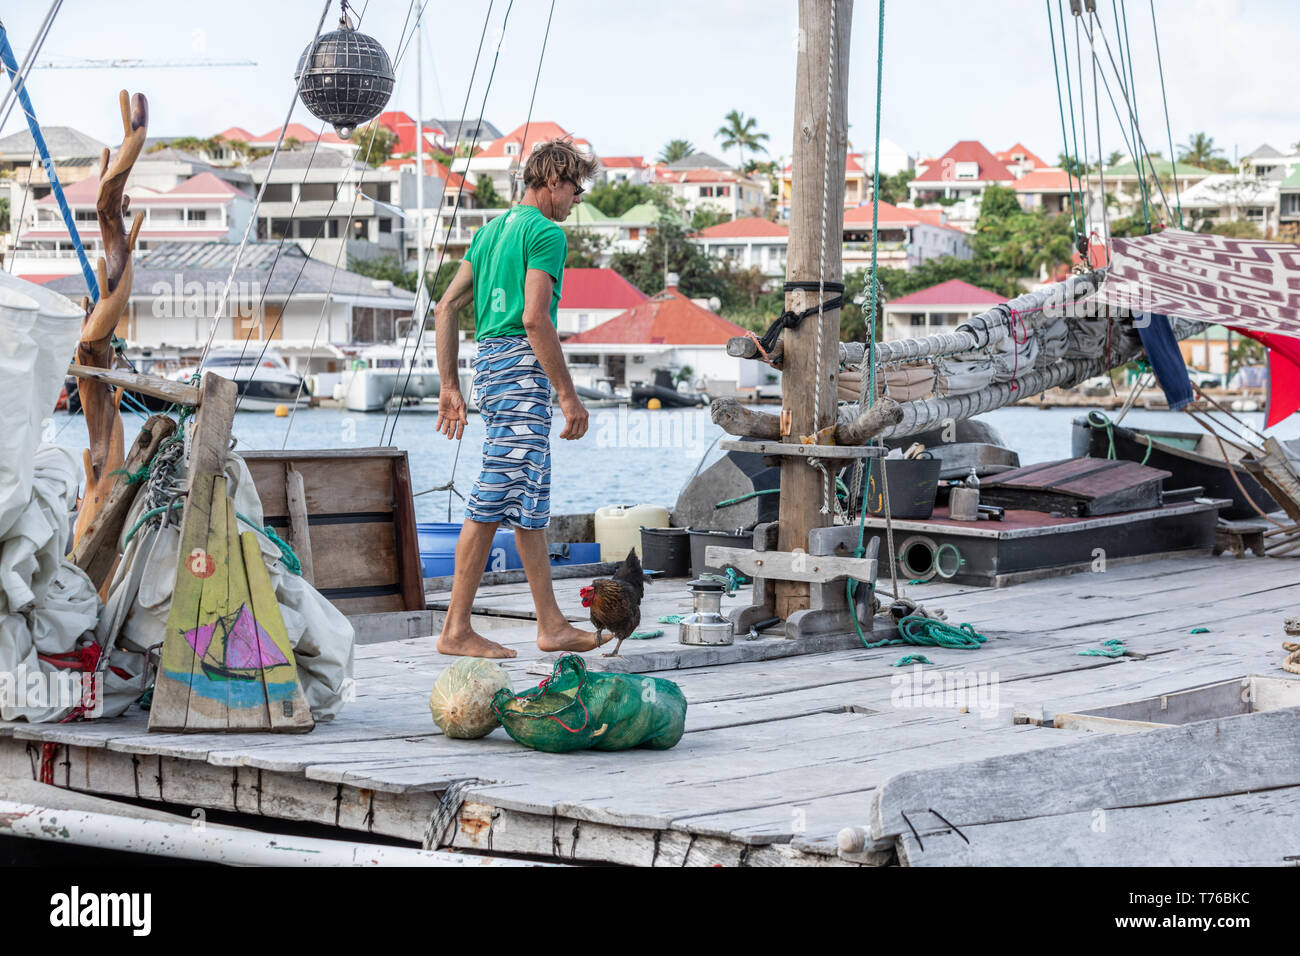 Man on a sail boat in Gustavia, St Barts Stock Photo